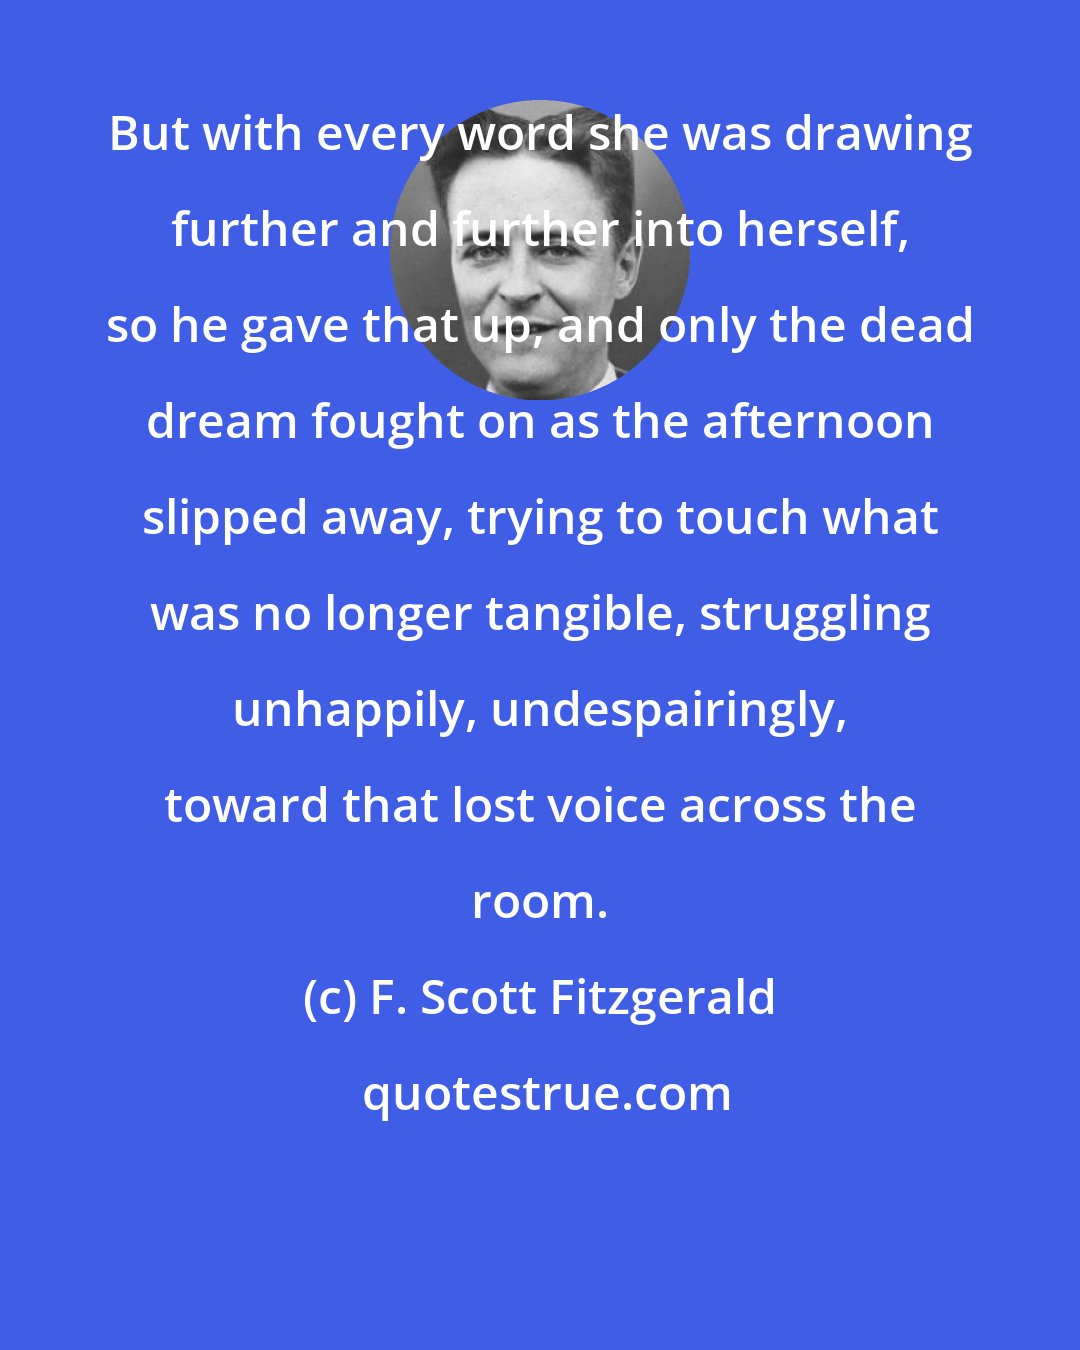 F. Scott Fitzgerald: But with every word she was drawing further and further into herself, so he gave that up, and only the dead dream fought on as the afternoon slipped away, trying to touch what was no longer tangible, struggling unhappily, undespairingly, toward that lost voice across the room.